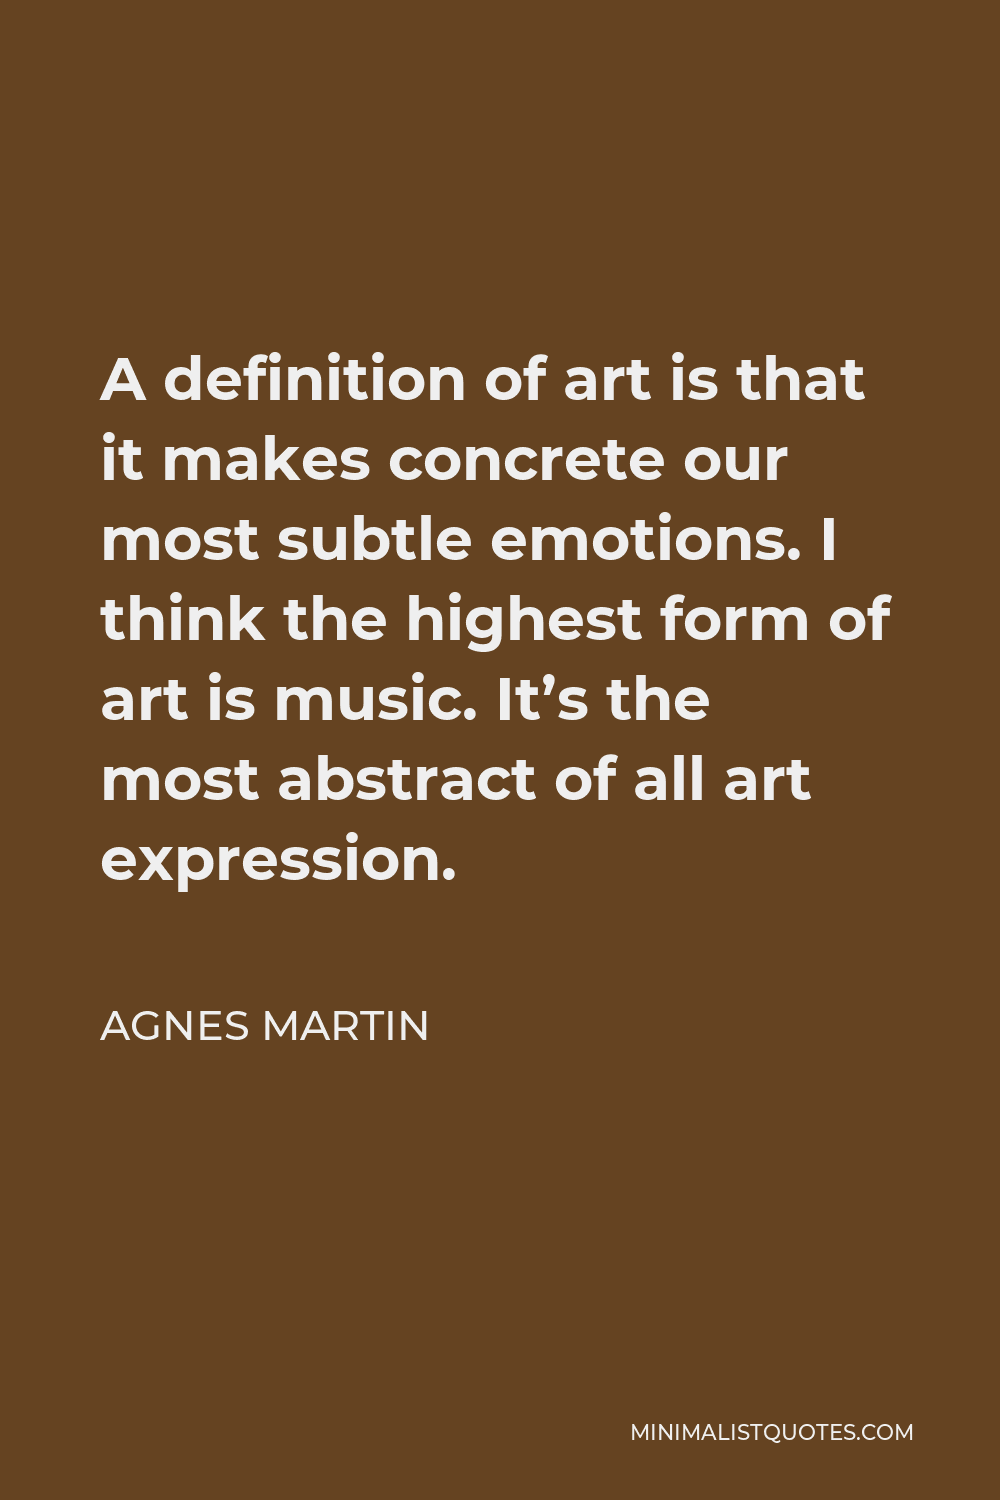 Agnes Martin Quote: “It's not about facts, it's about feelings. It's about  remembering feelings and happiness. A definition of art is that it”